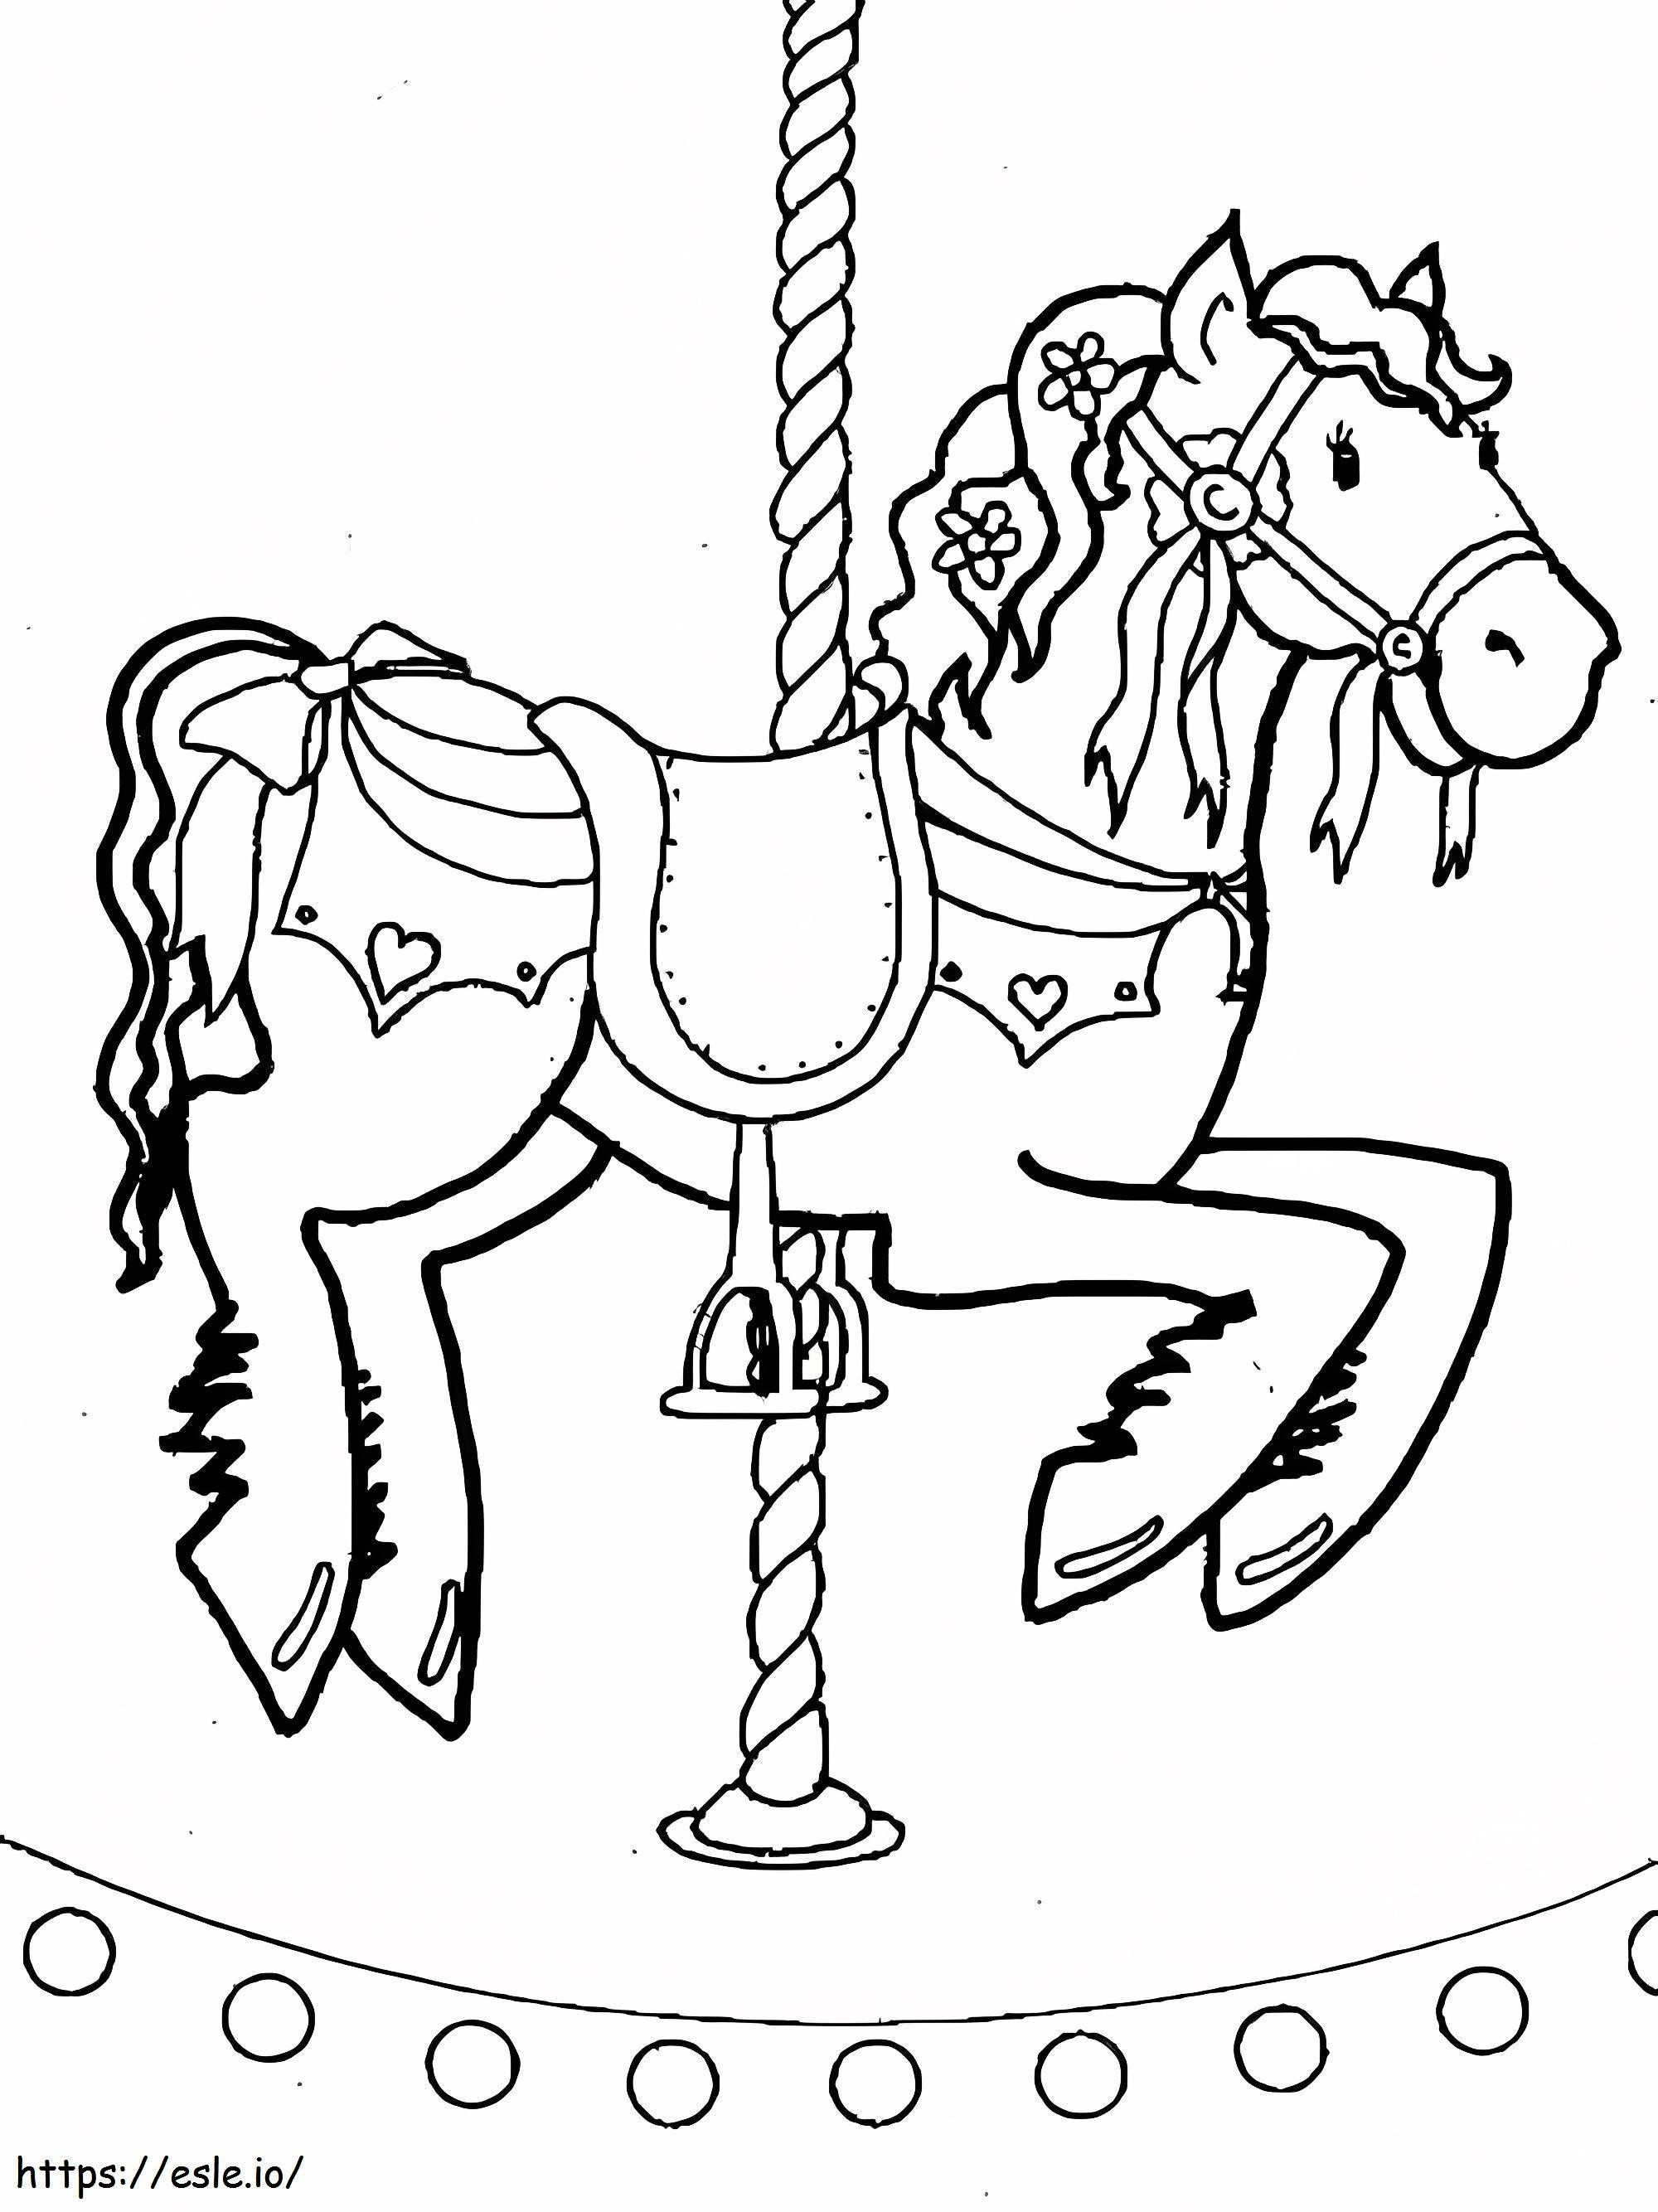 Carousel Horse 3 coloring page